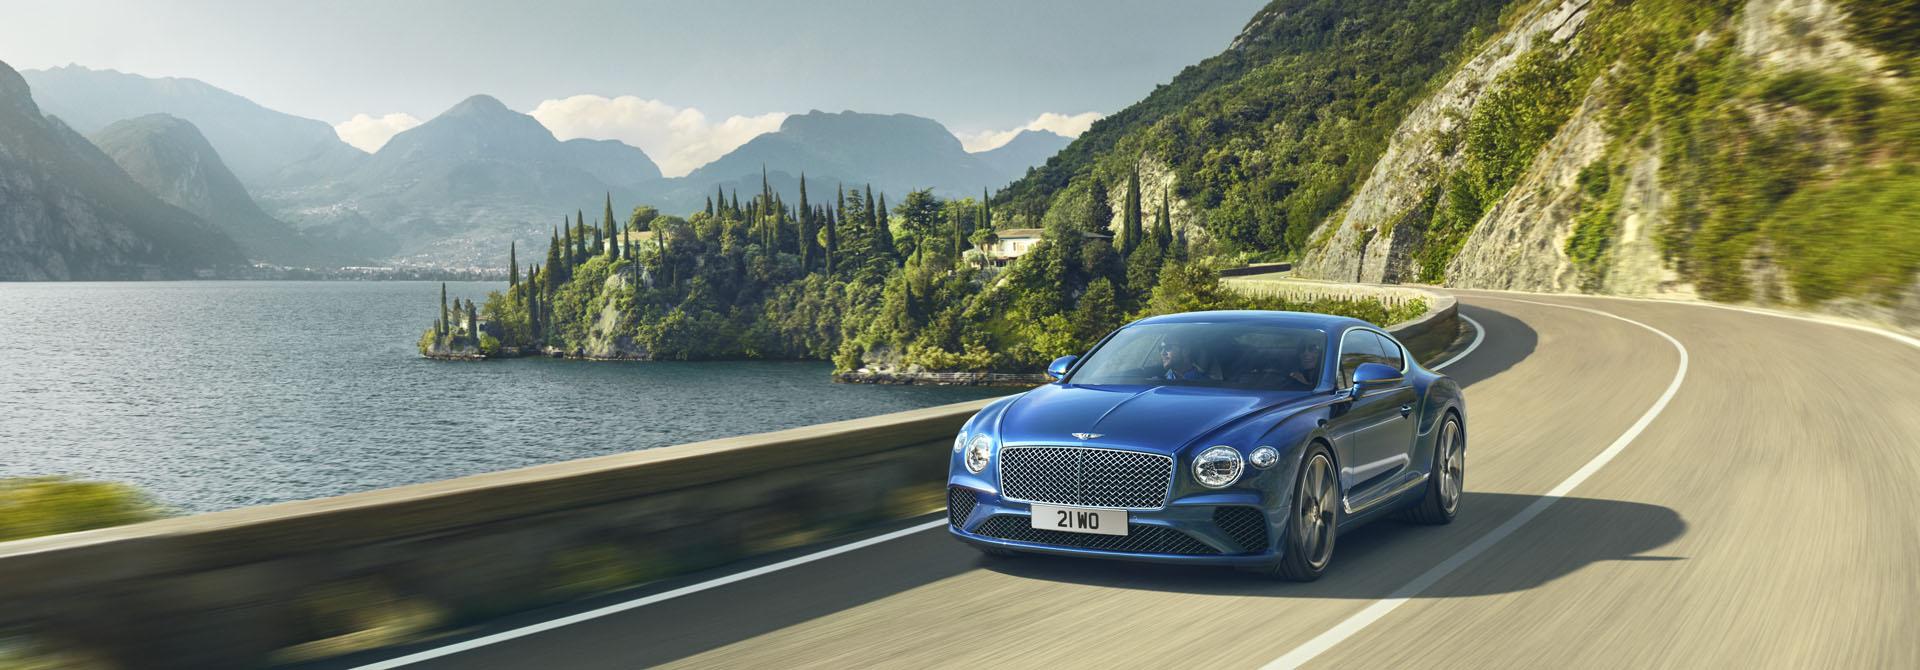 The new Bentley Continental GT